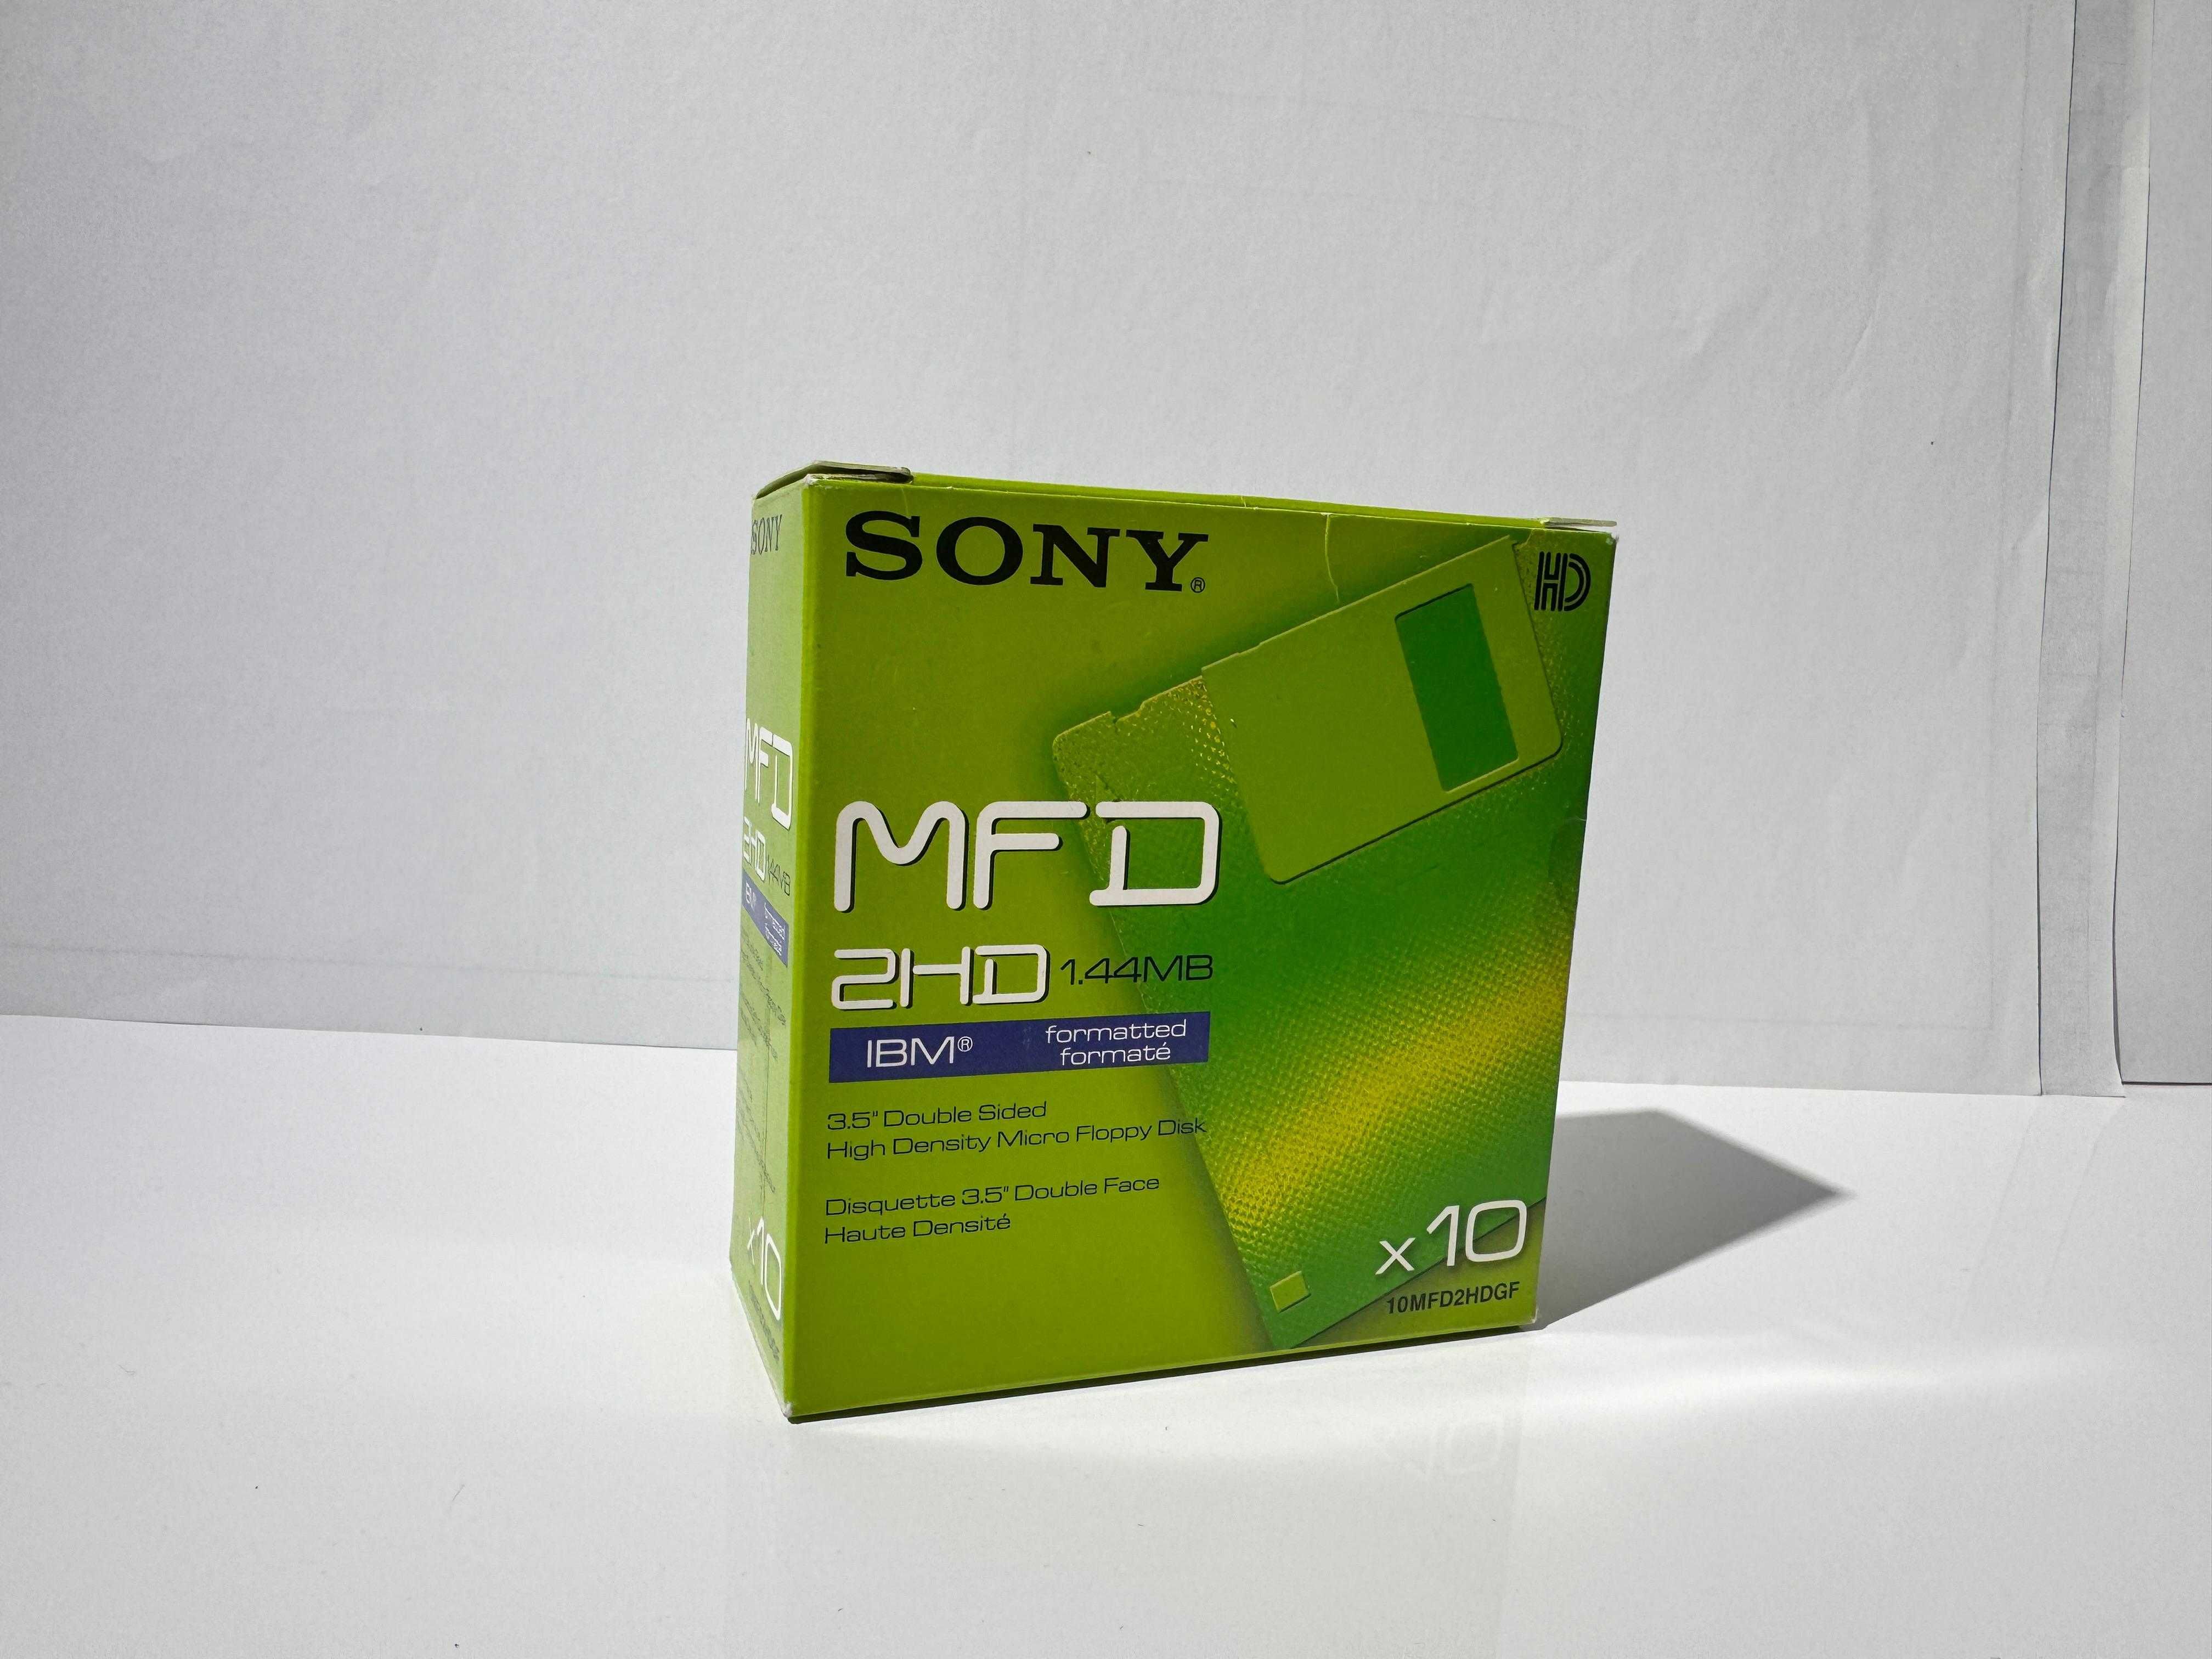 Flopy  Discuri SONY  3.5" 2HD 1.44Mb - Noi.